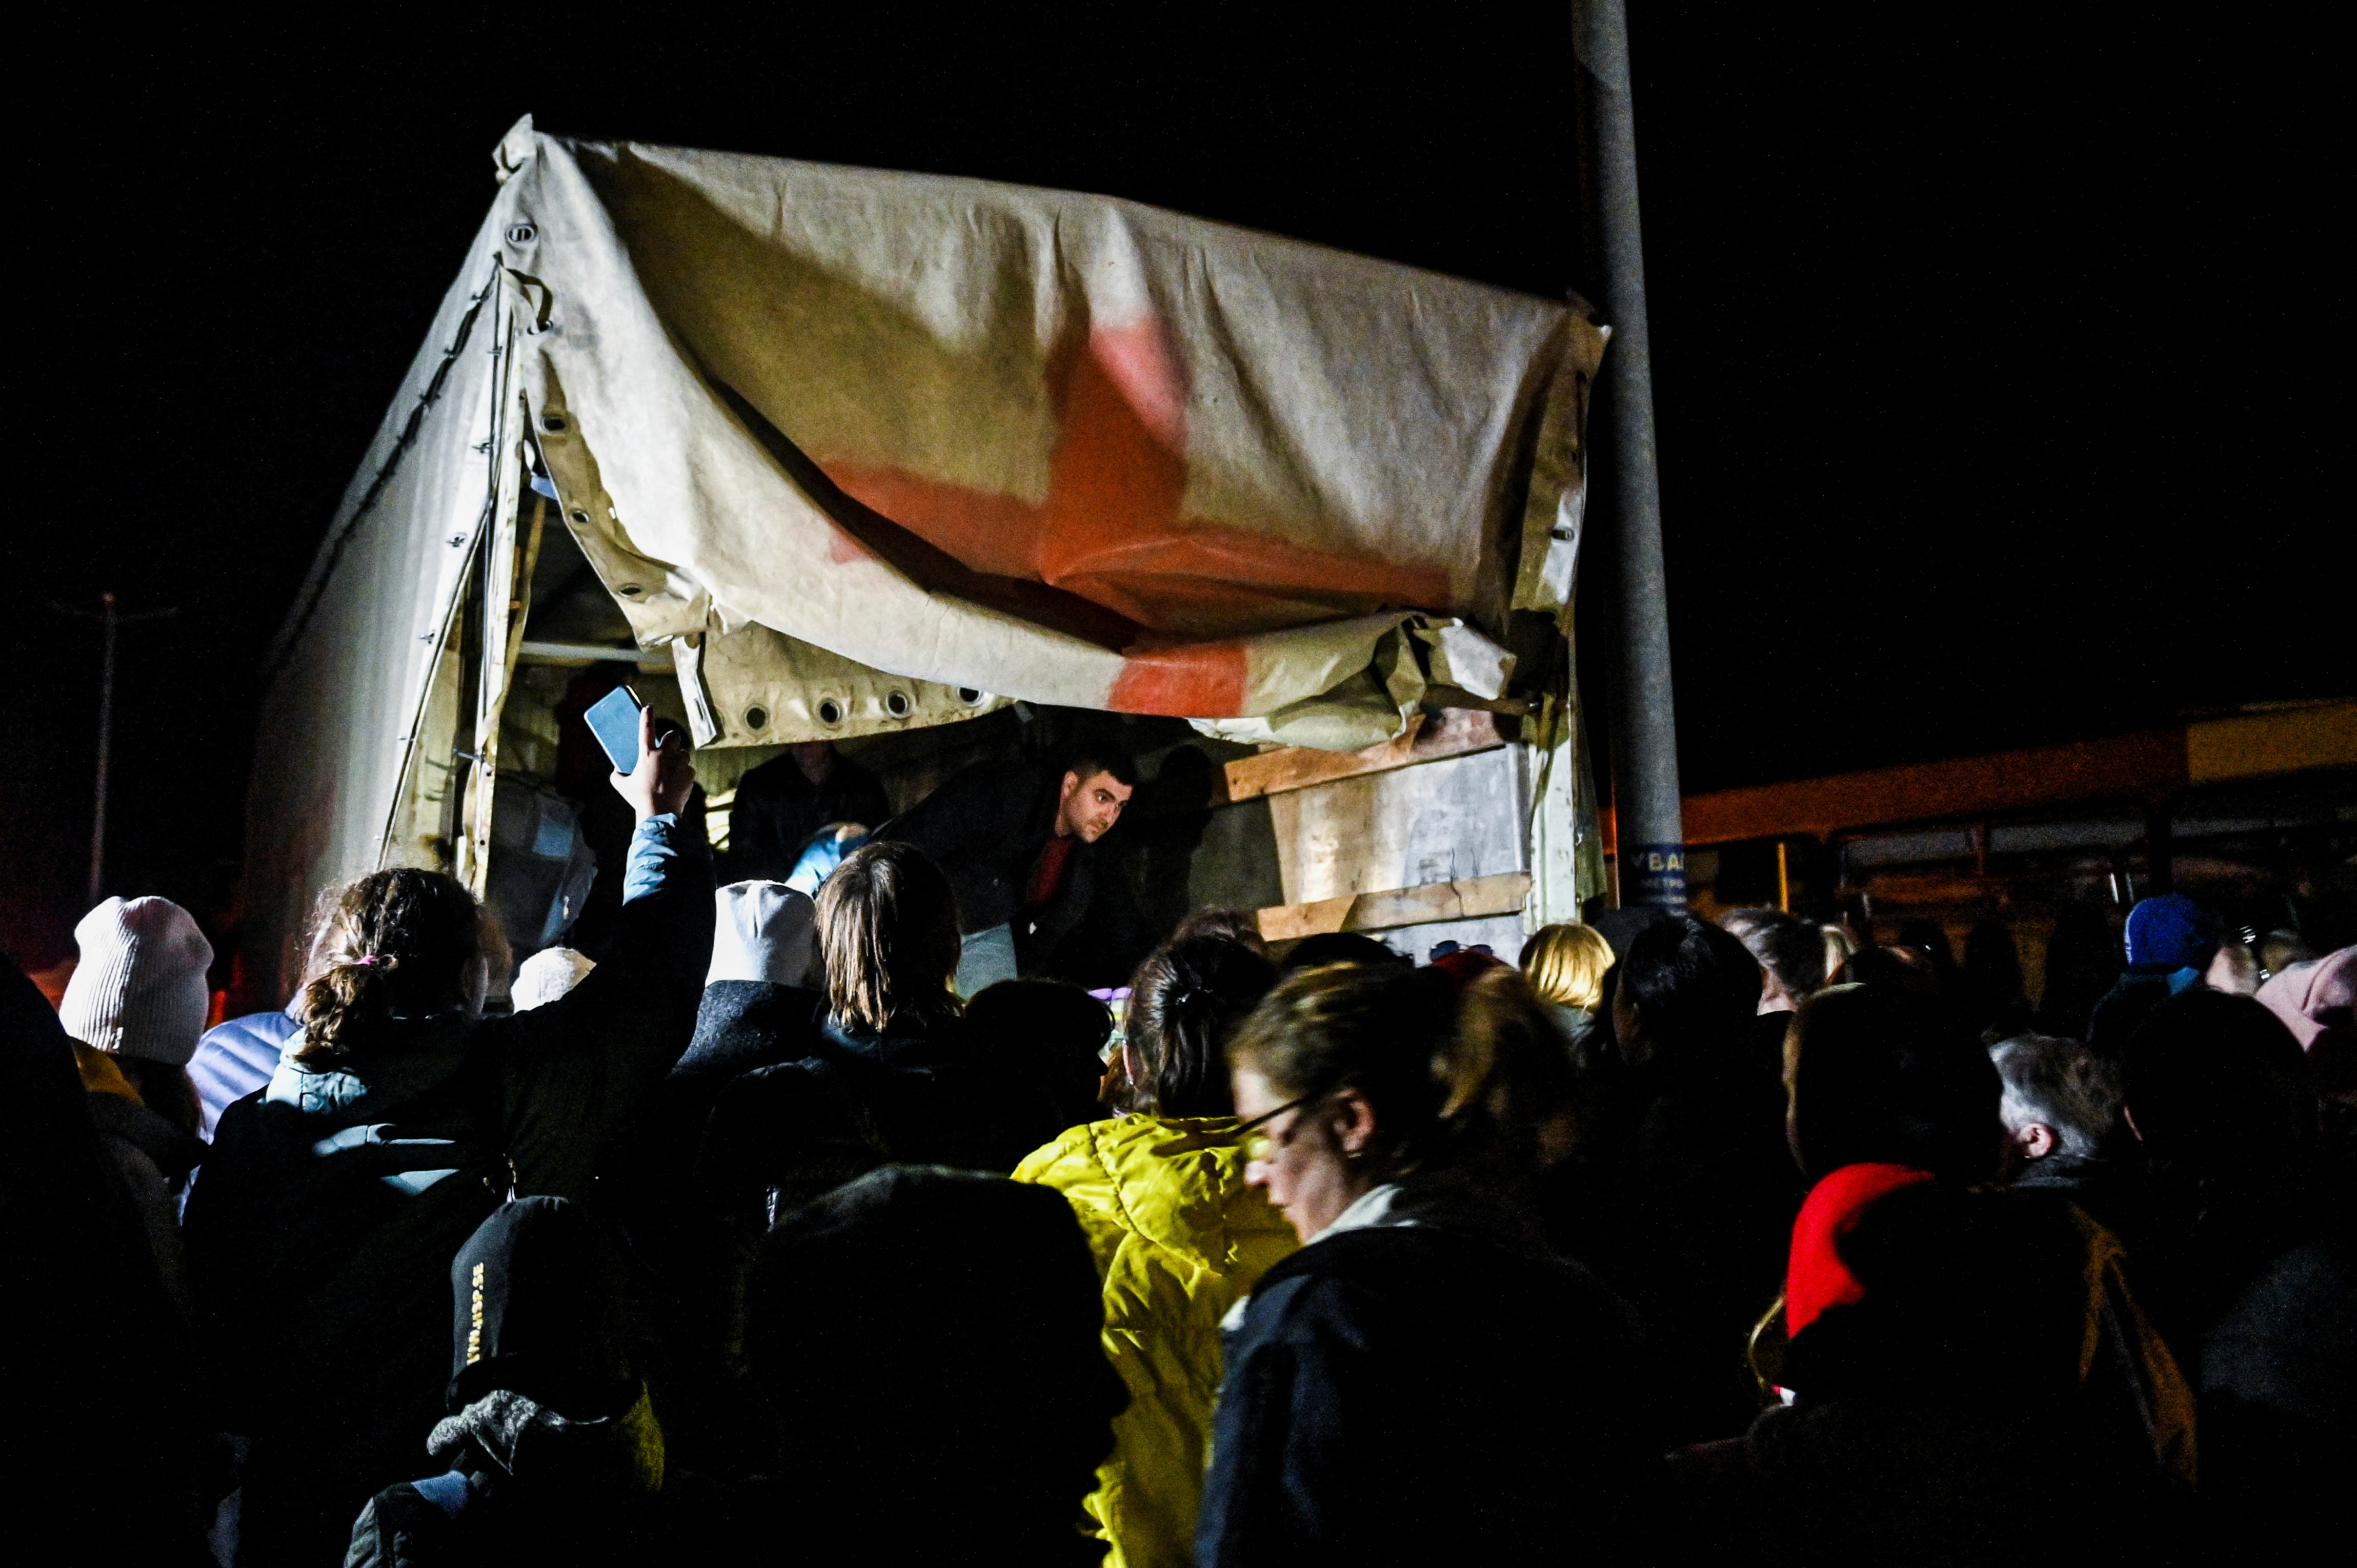 People who flee Mariupol and Melitopol wait around an evacuee cargo truck at a collecting point in Zaporizhzhia